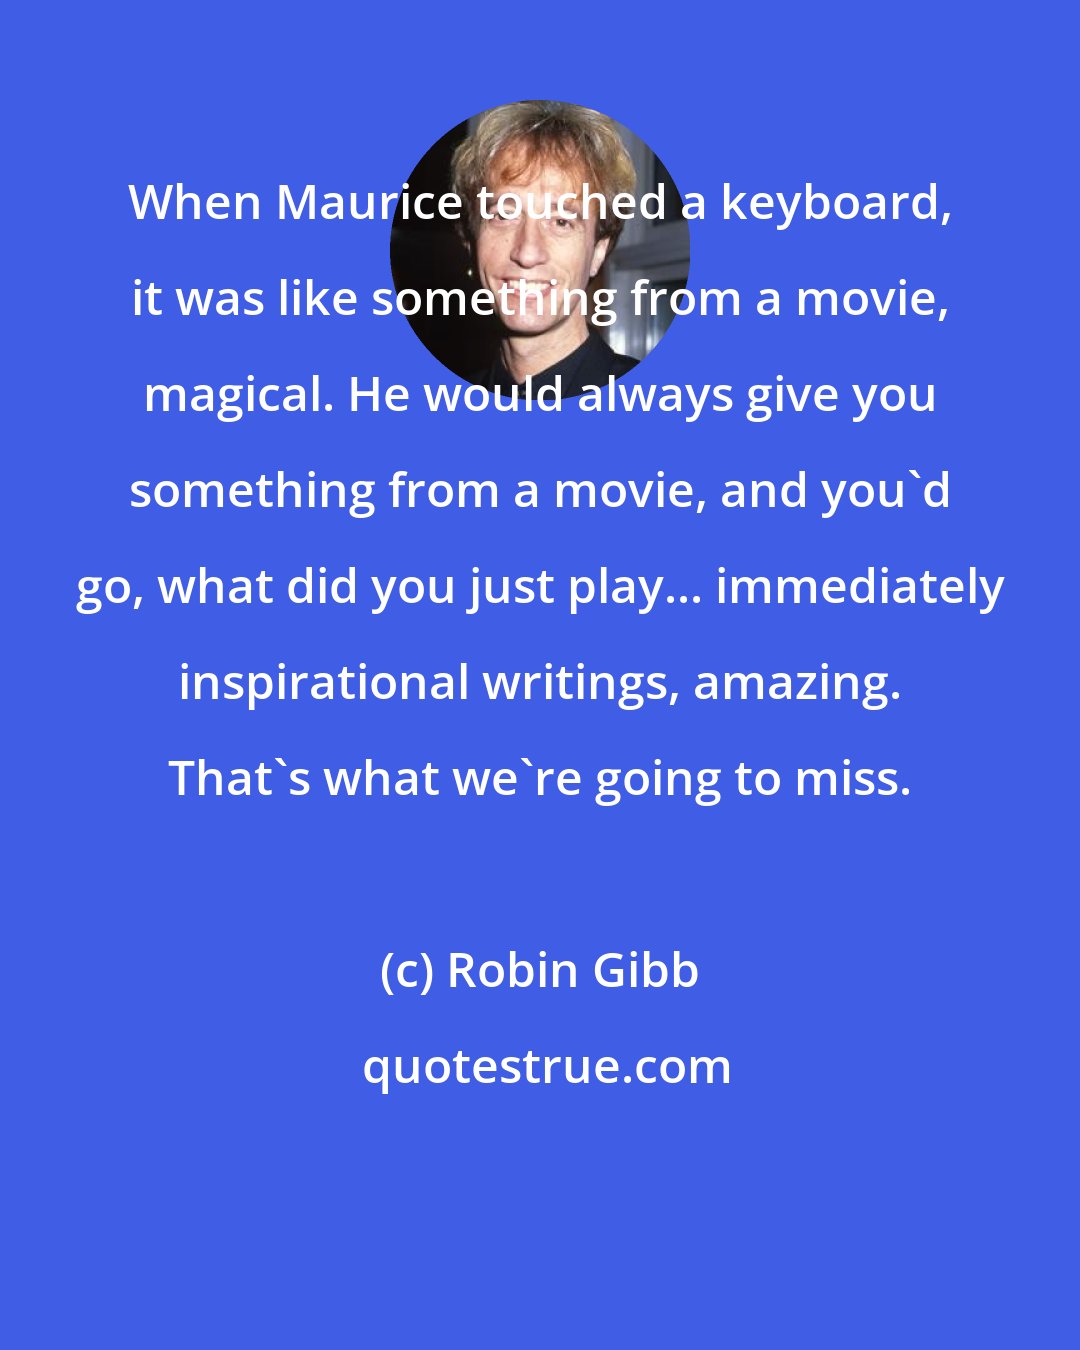 Robin Gibb: When Maurice touched a keyboard, it was like something from a movie, magical. He would always give you something from a movie, and you'd go, what did you just play... immediately inspirational writings, amazing. That's what we're going to miss.